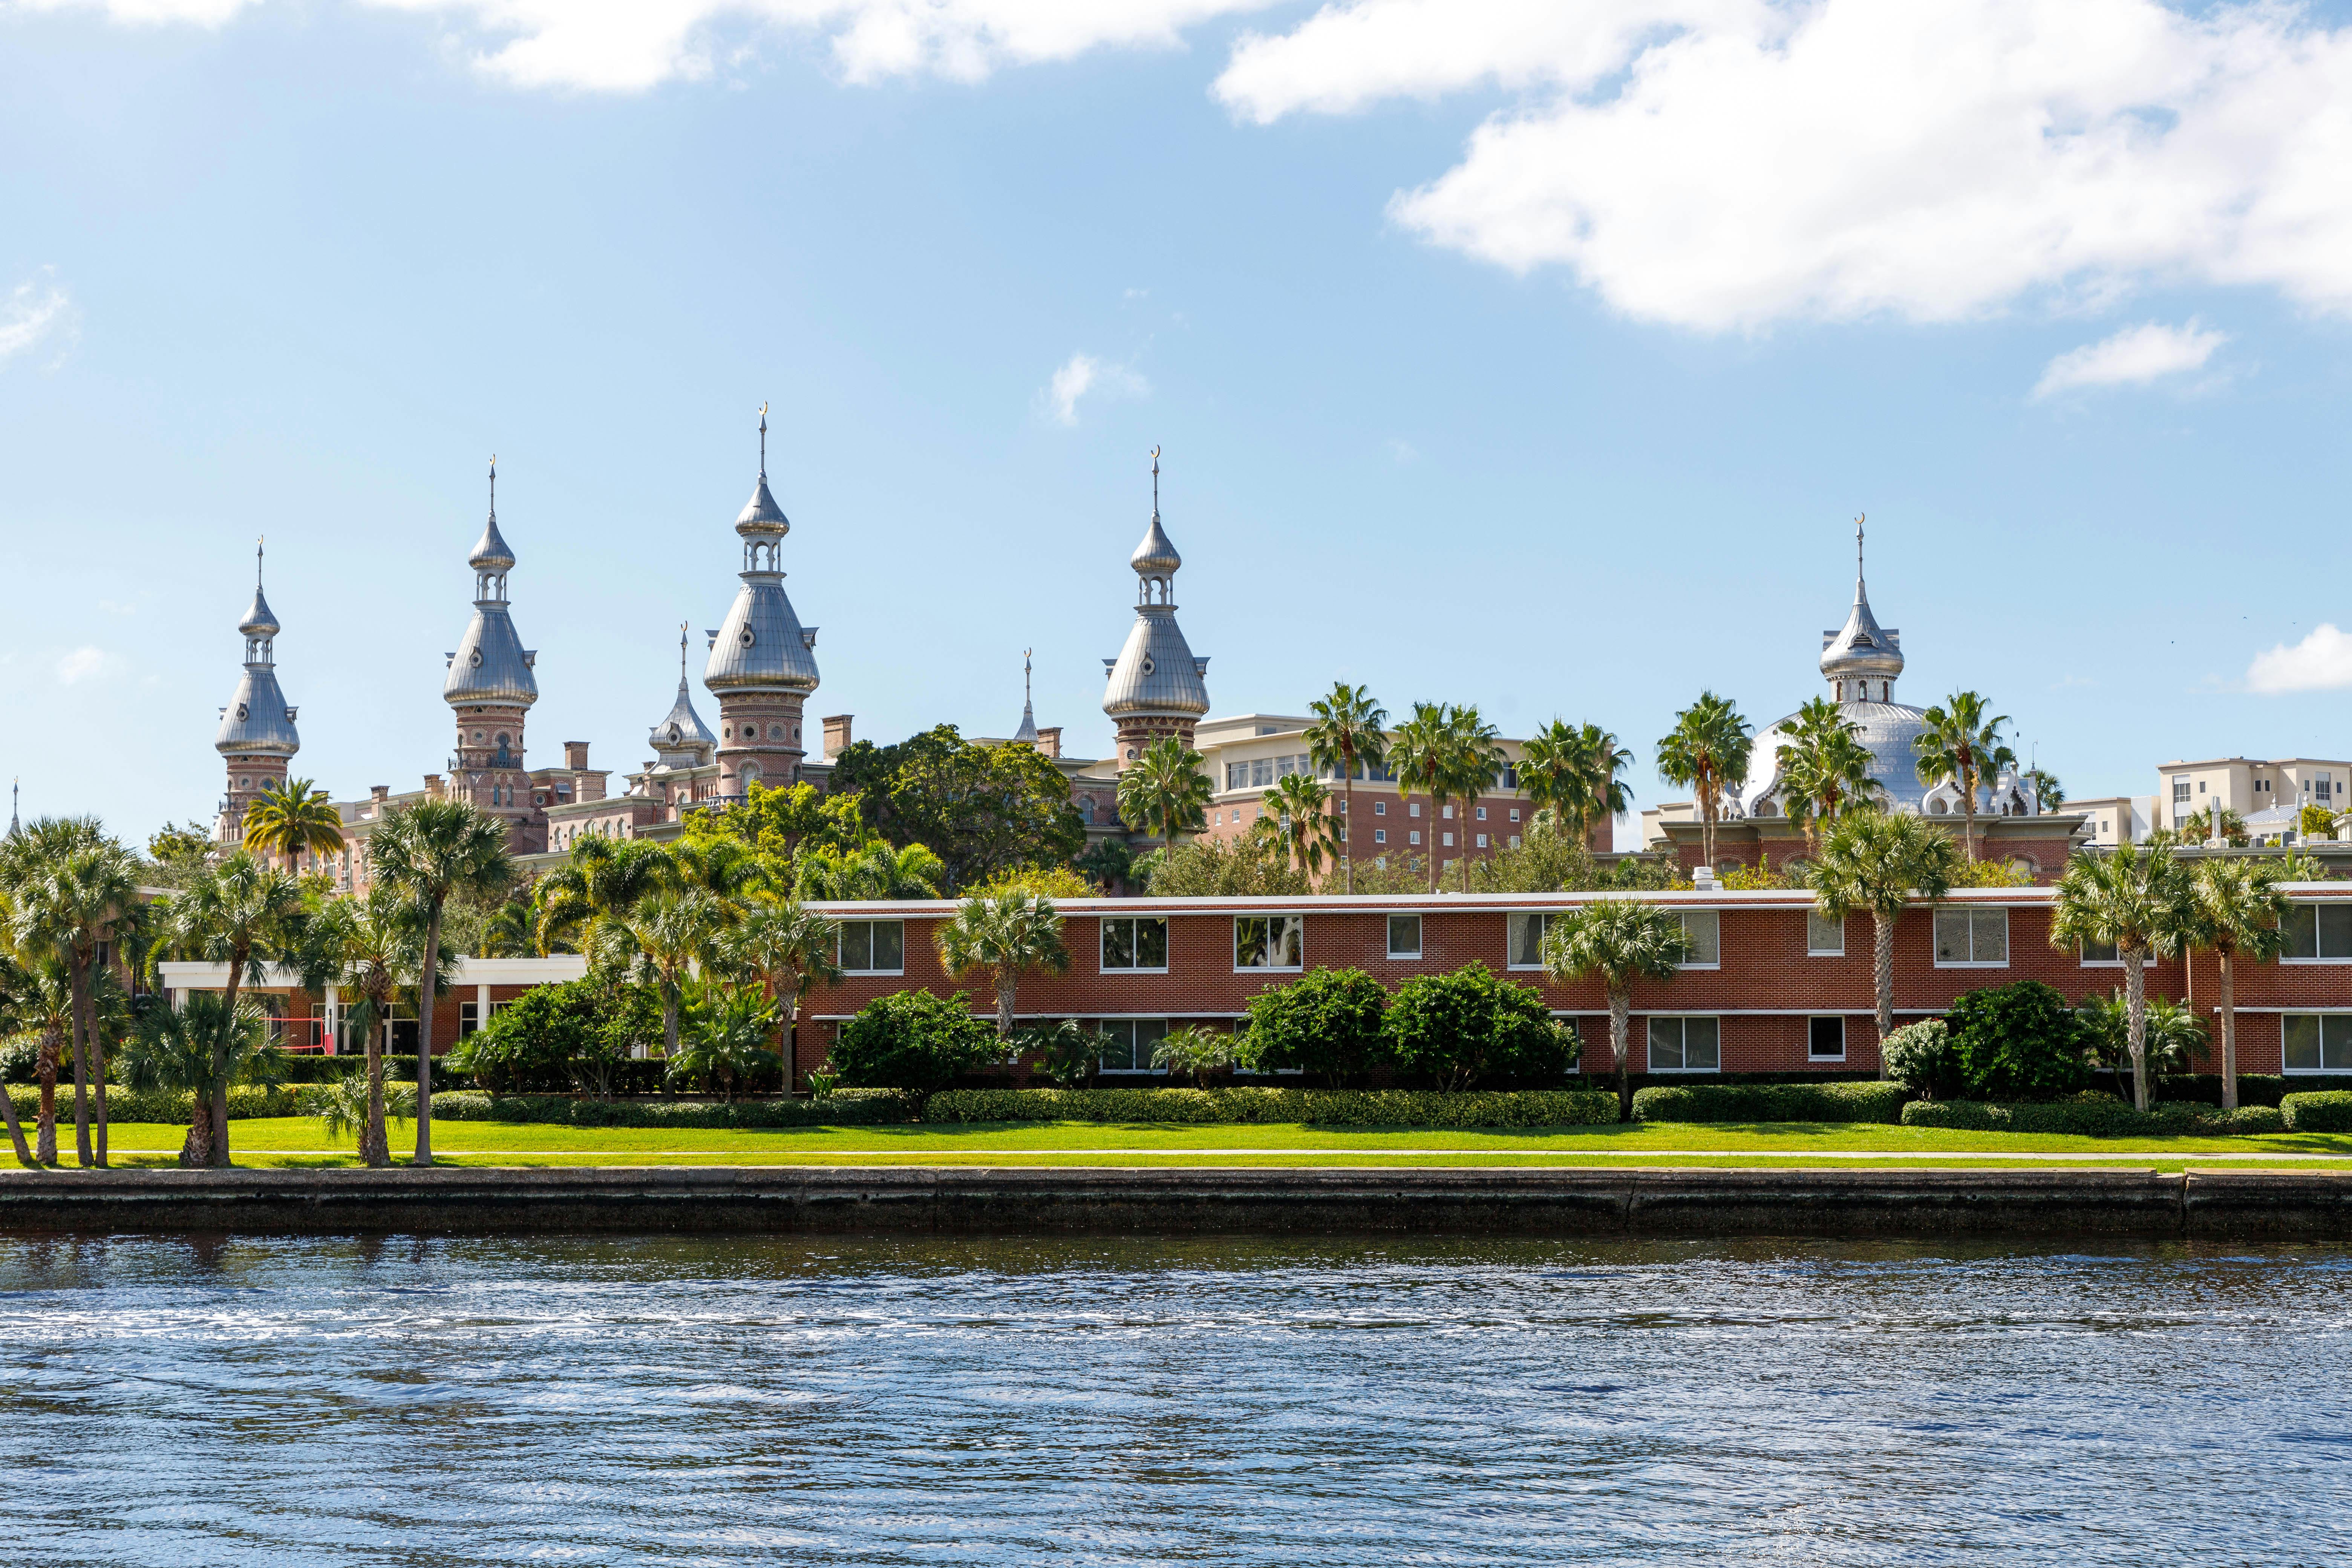 university of tampa building seen from the river florida usa